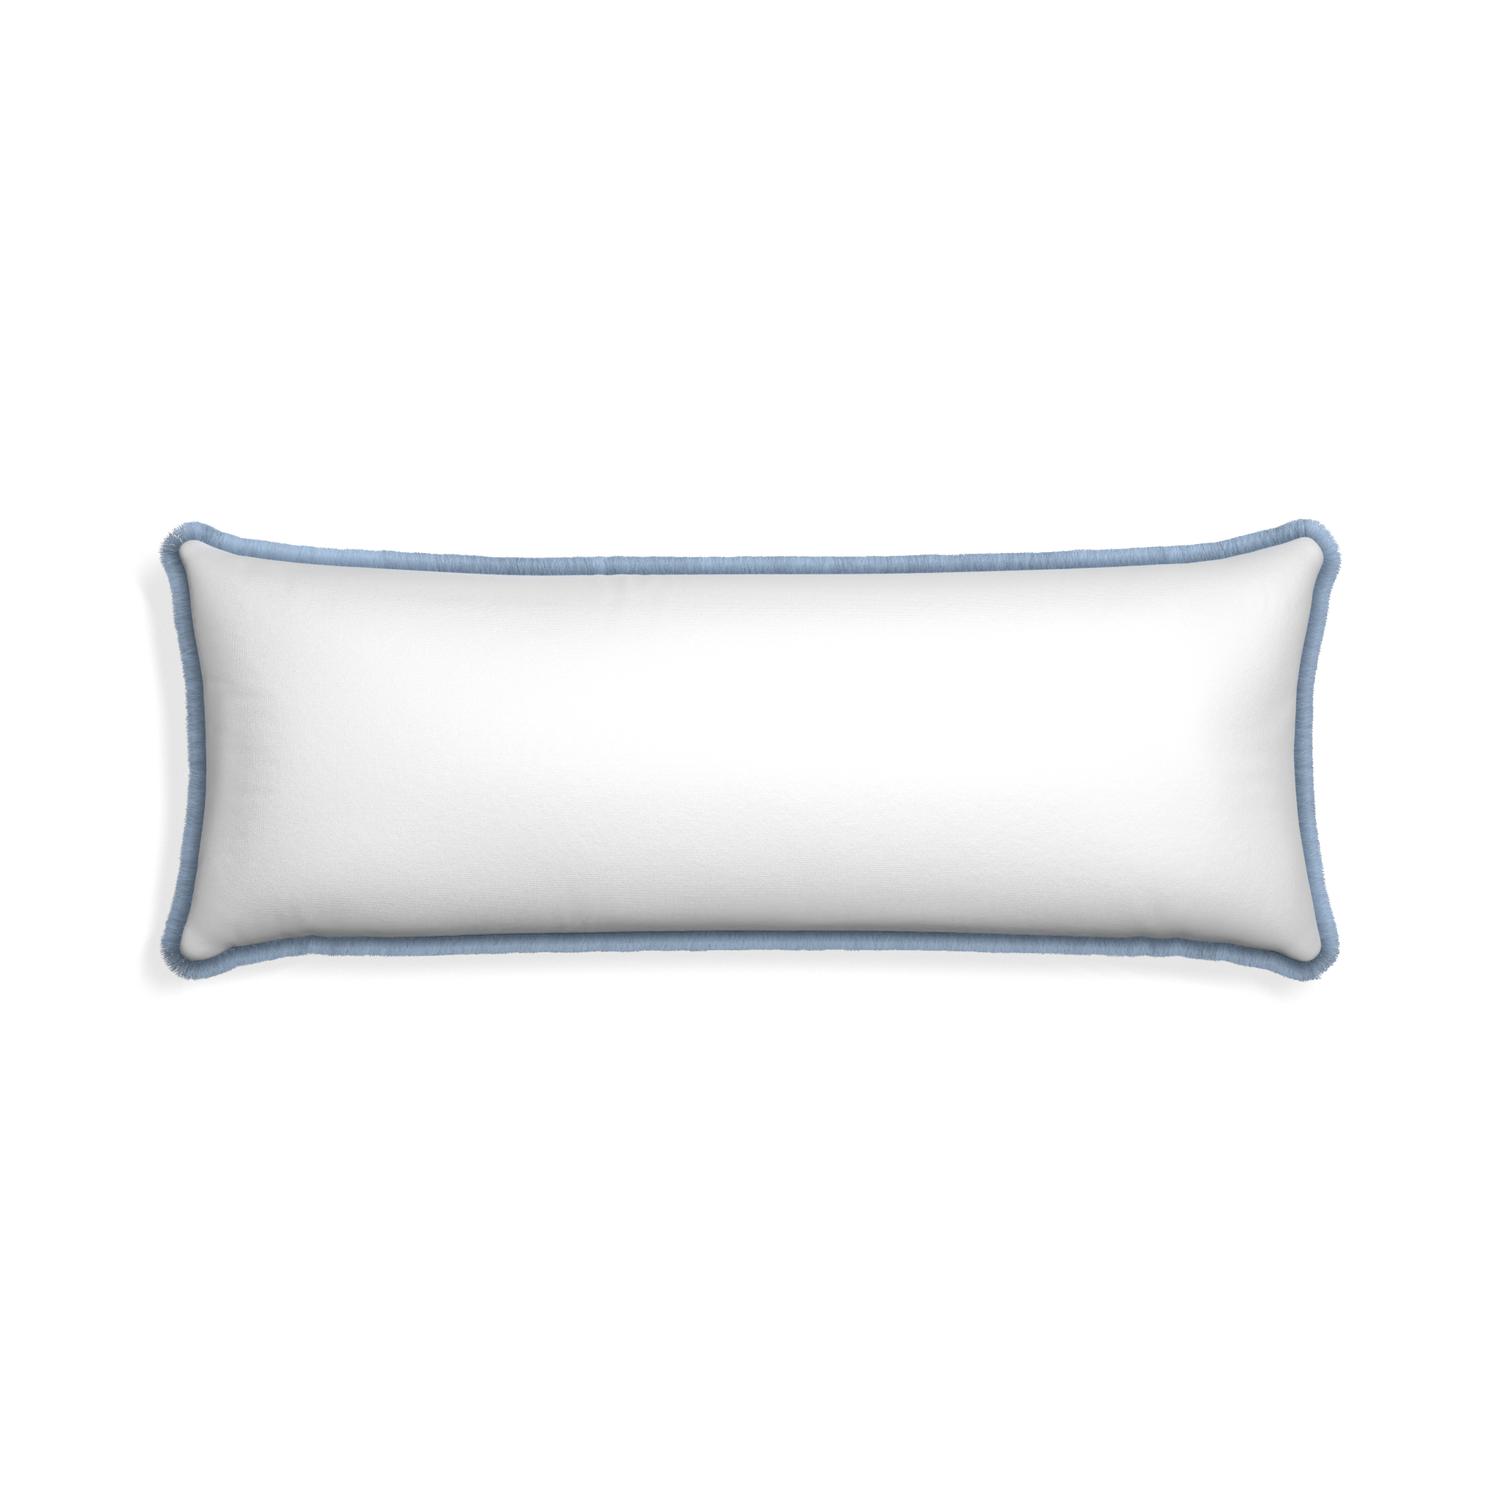 Xl-lumbar snow custom pillow with sky fringe on white background